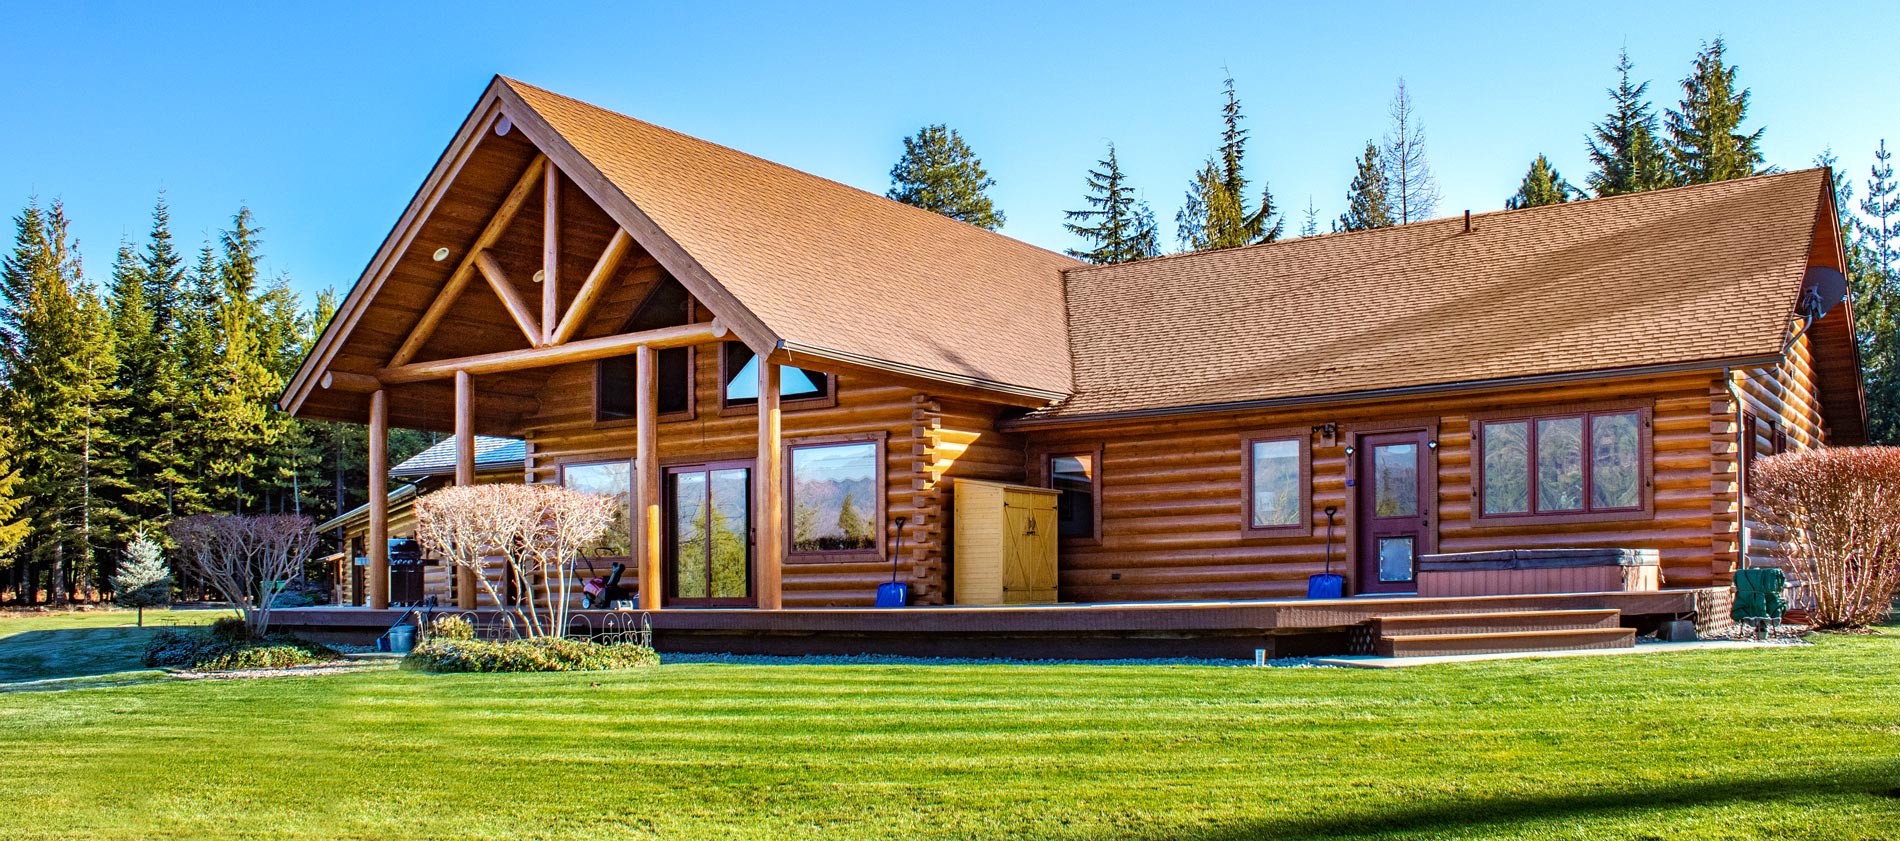 Meadows at Fall Creek Luxury Log Home for Sale